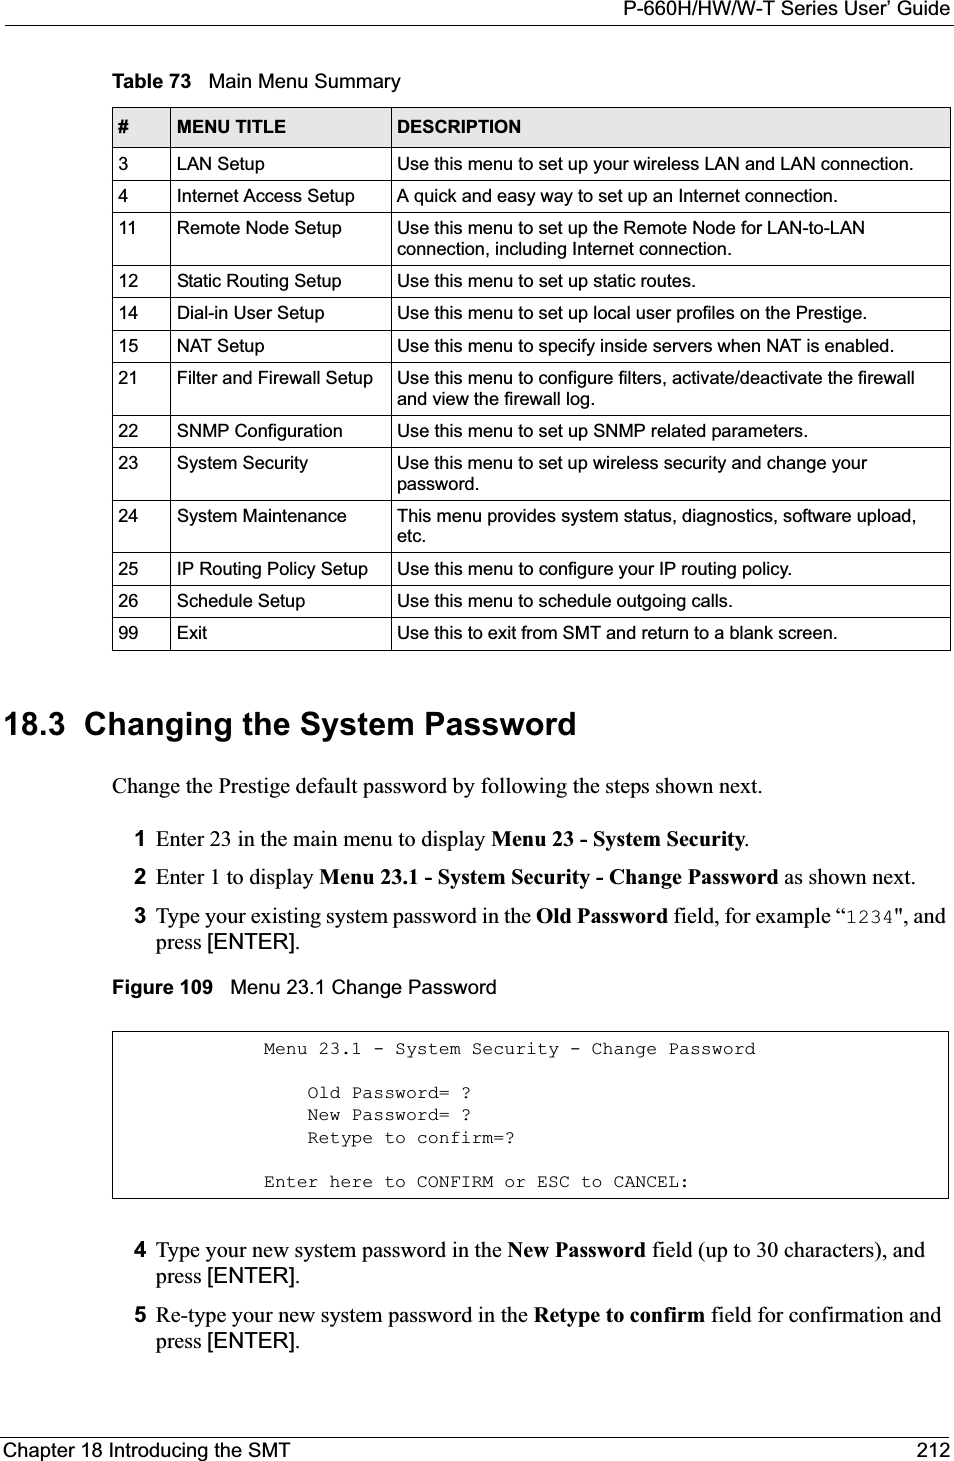 P-660H/HW/W-T Series User’ GuideChapter 18 Introducing the SMT 21218.3  Changing the System PasswordChange the Prestige default password by following the steps shown next. 1Enter 23 in the main menu to display Menu 23 - System Security.2Enter 1 to display Menu 23.1 - System Security - Change Password as shown next.3Type your existing system password in the Old Password field, for example “1234&quot;, and press [ENTER].Figure 109   Menu 23.1 Change Password4Type your new system password in the New Password field (up to 30 characters), and press [ENTER].5Re-type your new system password in the Retype to confirm field for confirmation and press [ENTER].3 LAN Setup Use this menu to set up your wireless LAN and LAN connection.4 Internet Access Setup A quick and easy way to set up an Internet connection.11 Remote Node Setup Use this menu to set up the Remote Node for LAN-to-LAN connection, including Internet connection.12 Static Routing Setup Use this menu to set up static routes. 14 Dial-in User Setup Use this menu to set up local user profiles on the Prestige.15 NAT Setup Use this menu to specify inside servers when NAT is enabled.21 Filter and Firewall Setup  Use this menu to configure filters, activate/deactivate the firewall and view the firewall log.22 SNMP Configuration  Use this menu to set up SNMP related parameters.23 System Security Use this menu to set up wireless security and change your password.24 System Maintenance This menu provides system status, diagnostics, software upload, etc.25 IP Routing Policy Setup Use this menu to configure your IP routing policy.26 Schedule Setup Use this menu to schedule outgoing calls.99 Exit Use this to exit from SMT and return to a blank screen.Table 73   Main Menu Summary#MENU TITLE DESCRIPTIONMenu 23.1 - System Security - Change Password    Old Password= ?    New Password= ?    Retype to confirm=?Enter here to CONFIRM or ESC to CANCEL: